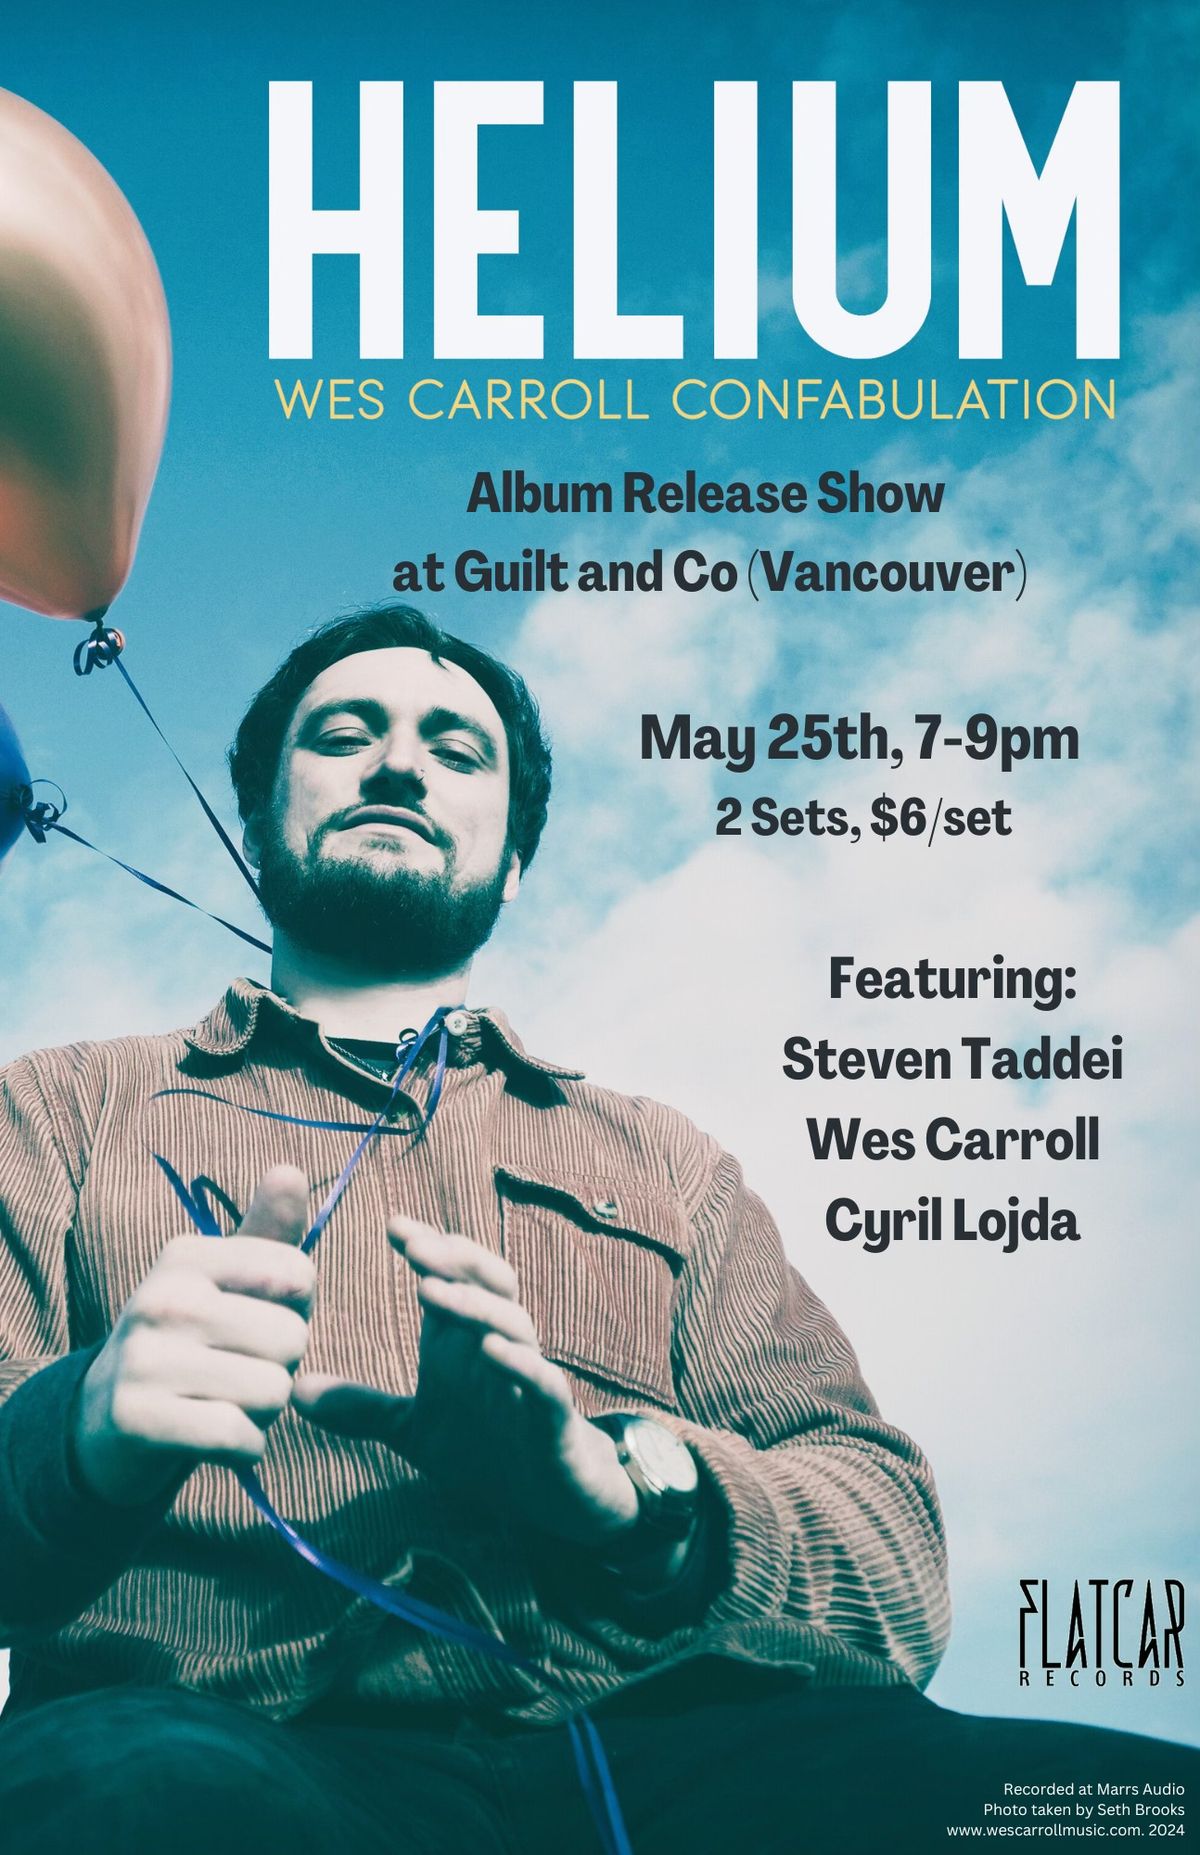 Early Show: The Wes Carroll Confabulation